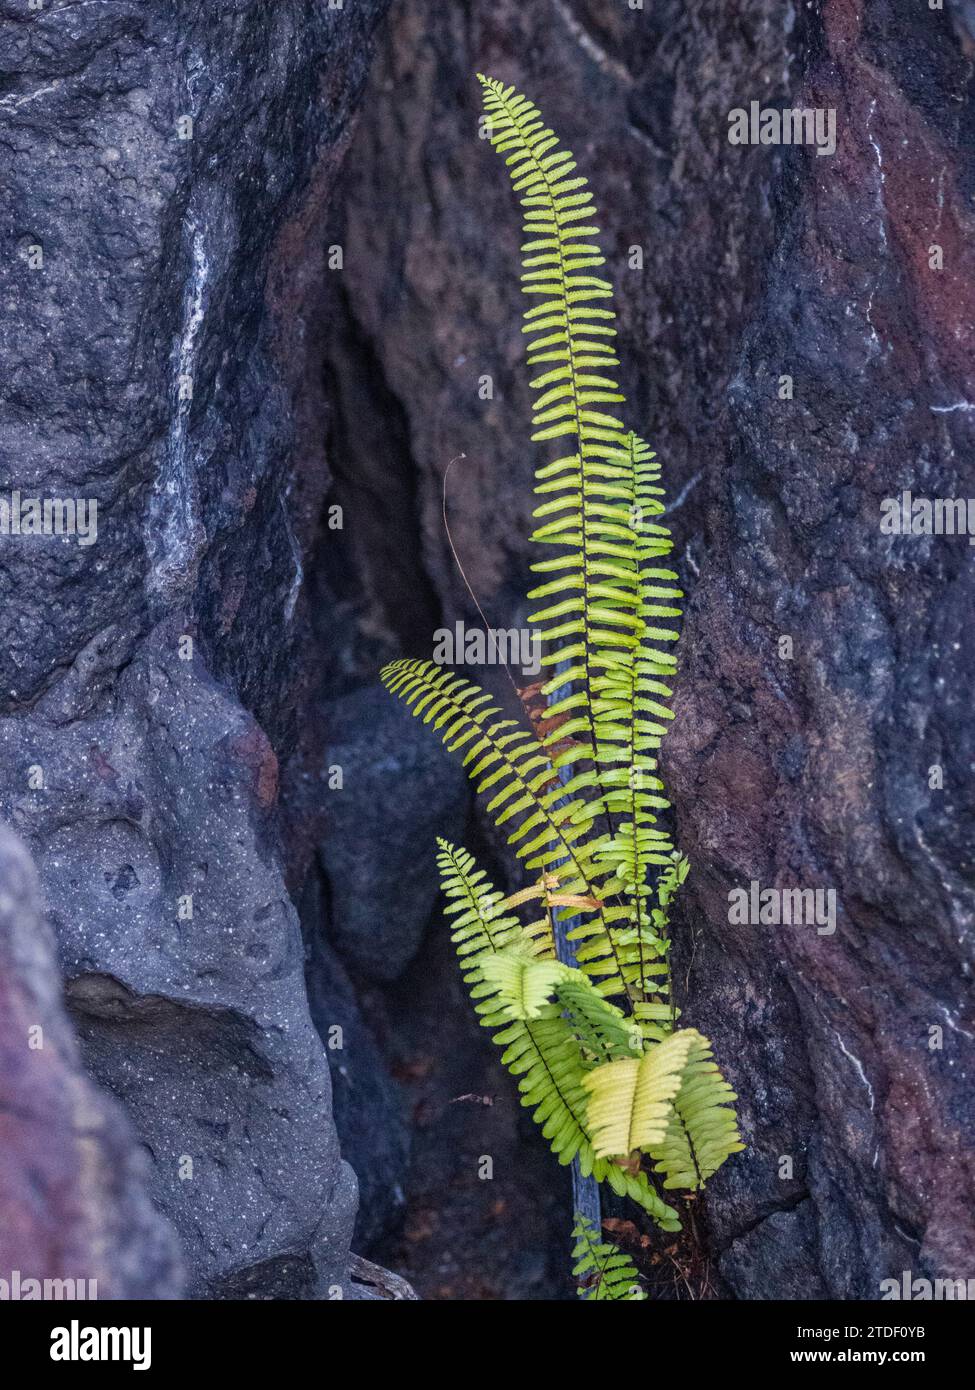 New life in the pahoehoe lava on the youngest island in the Galapagos, Fernandina Island, Galapagos Islands, UNESCO World Heritage Site, Ecuador Stock Photo